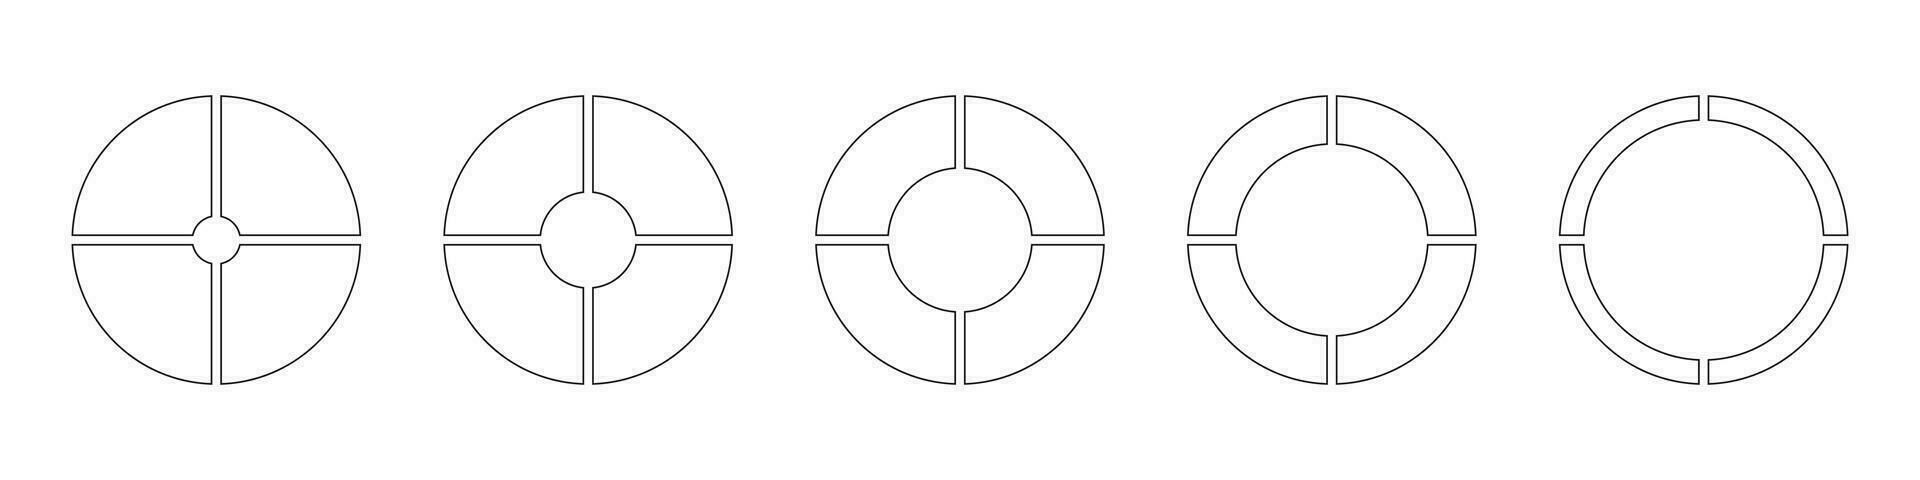 Wheels round divided in four sections. Diagrams infographic set. Circle section graph. Line art. Outline donut charts, pies segmented on 4 equal parts. Pie chart icon. Geometric vector simple element.